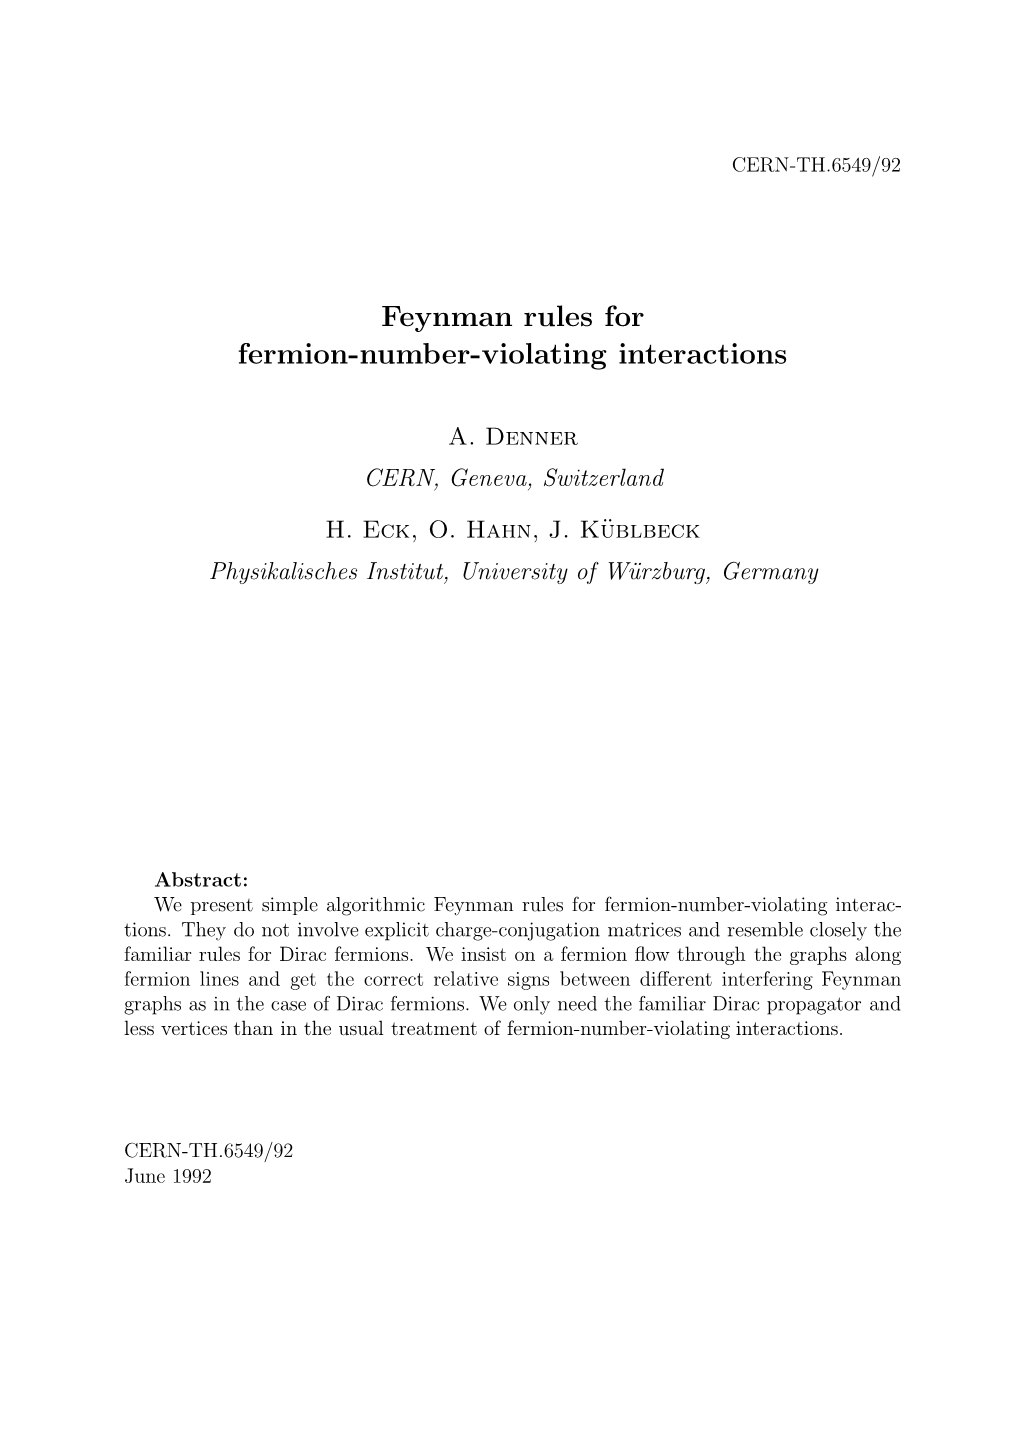 Feynman Rules for Fermion-Number-Violating Interactions